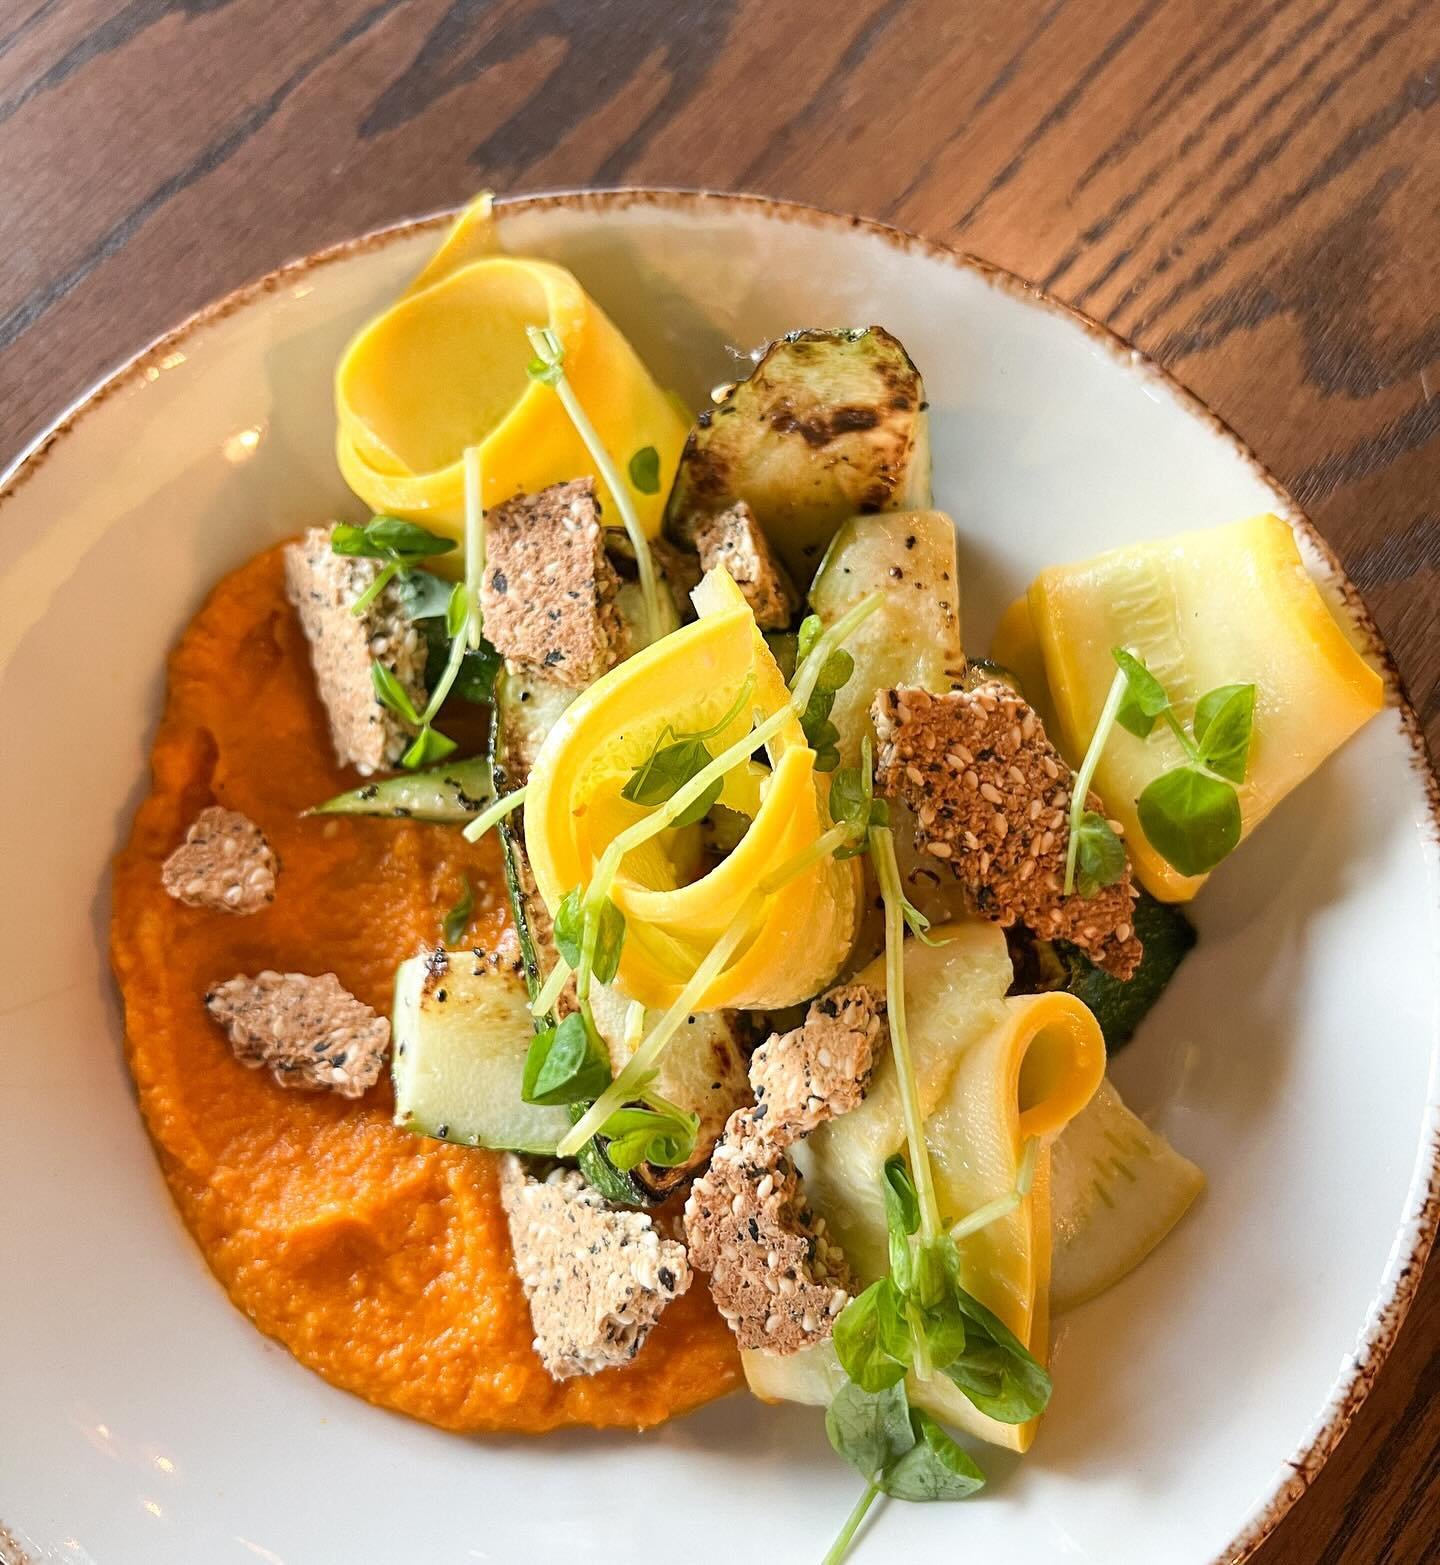 📣 We&rsquo;ll be OPEN at 5:30pm tonight for dinner service. 

📸 SQUASH 2 WAYS
Shaved summer squash, pan seared zucchini, ginger vinaigrette, smoked carrot sauce, sesame granola

Available for dinner and all day during the weekend for dine-in 🥕